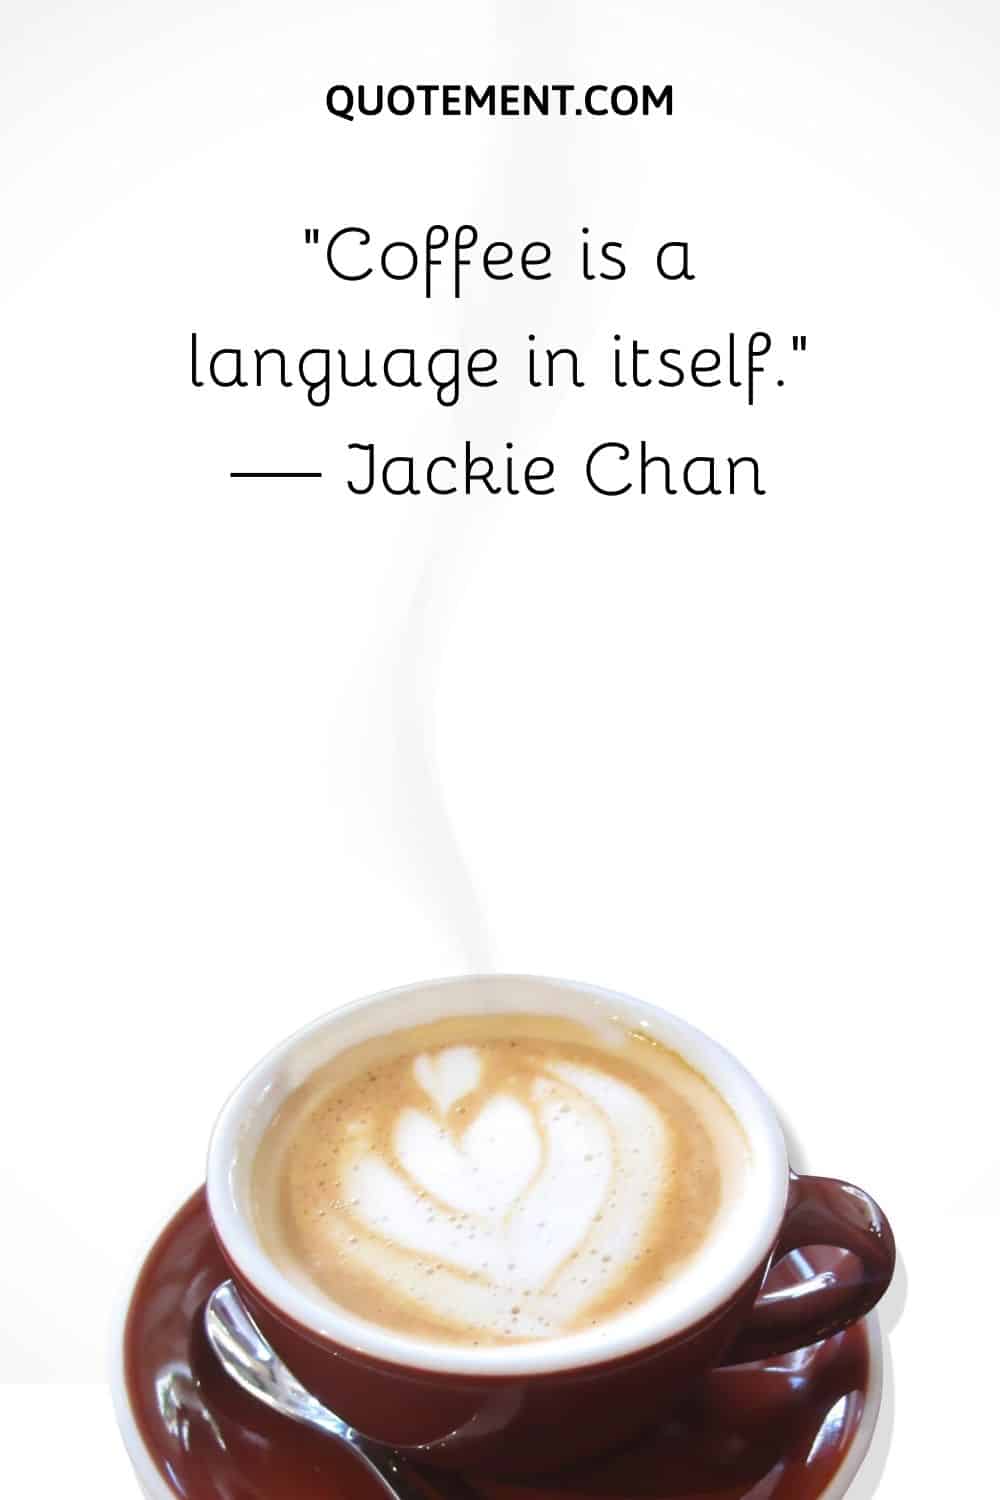 Coffee is a language in itself